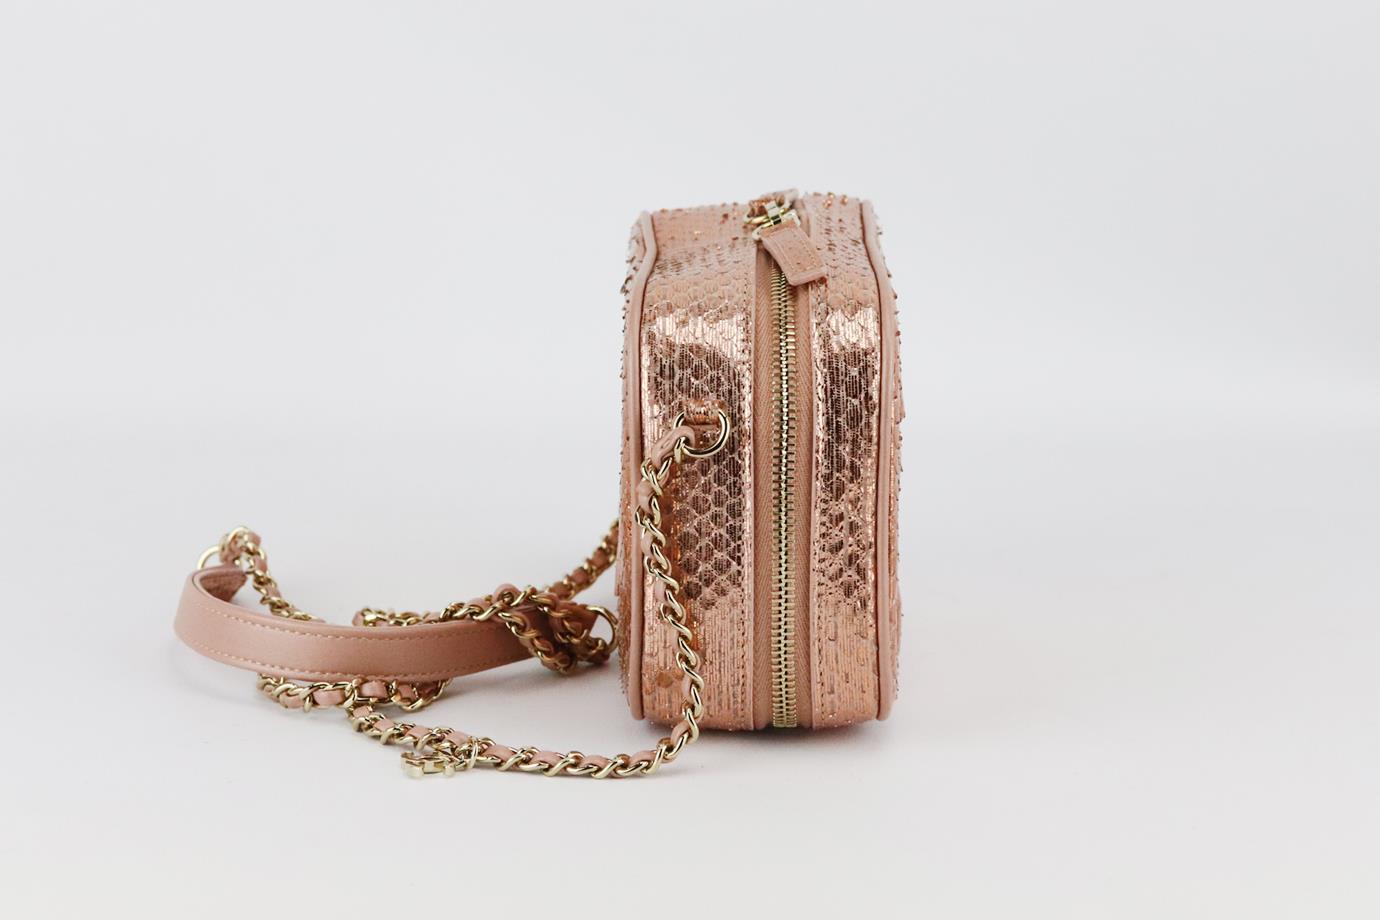 Chanel 2019 Mania Camera Case Metallic Python And Leather Shoulder Bag In Excellent Condition For Sale In London, GB